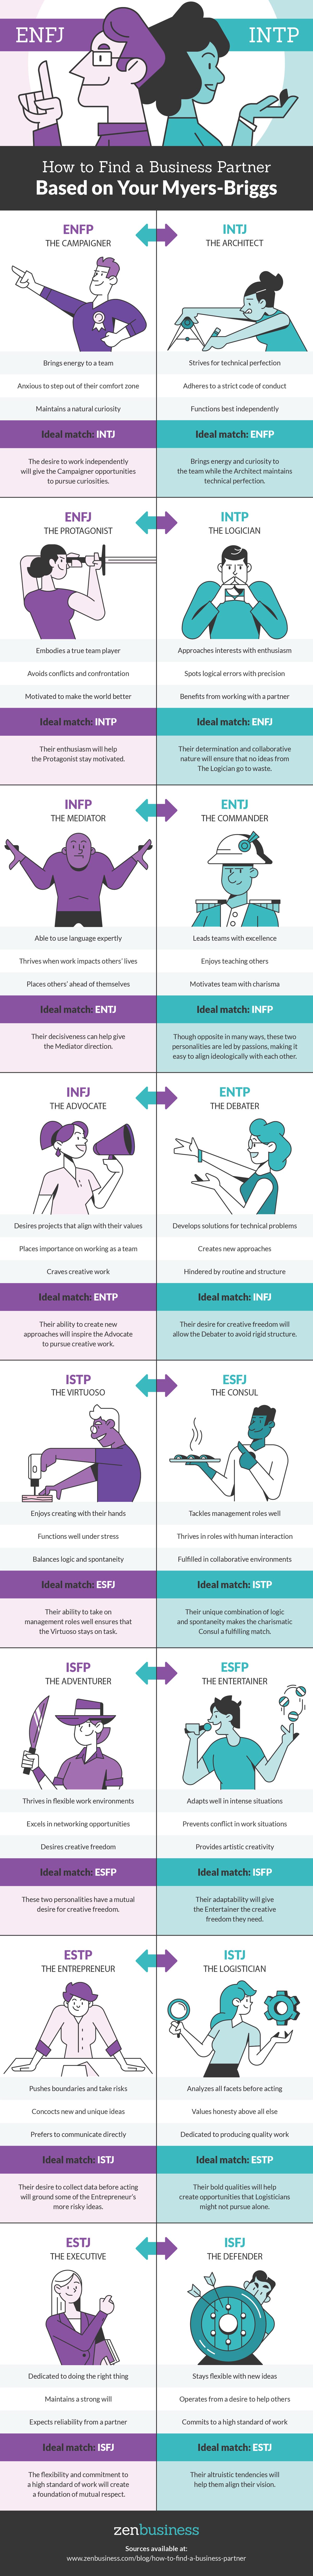 How to Find a Business Partner Based on your Myers-Briggs